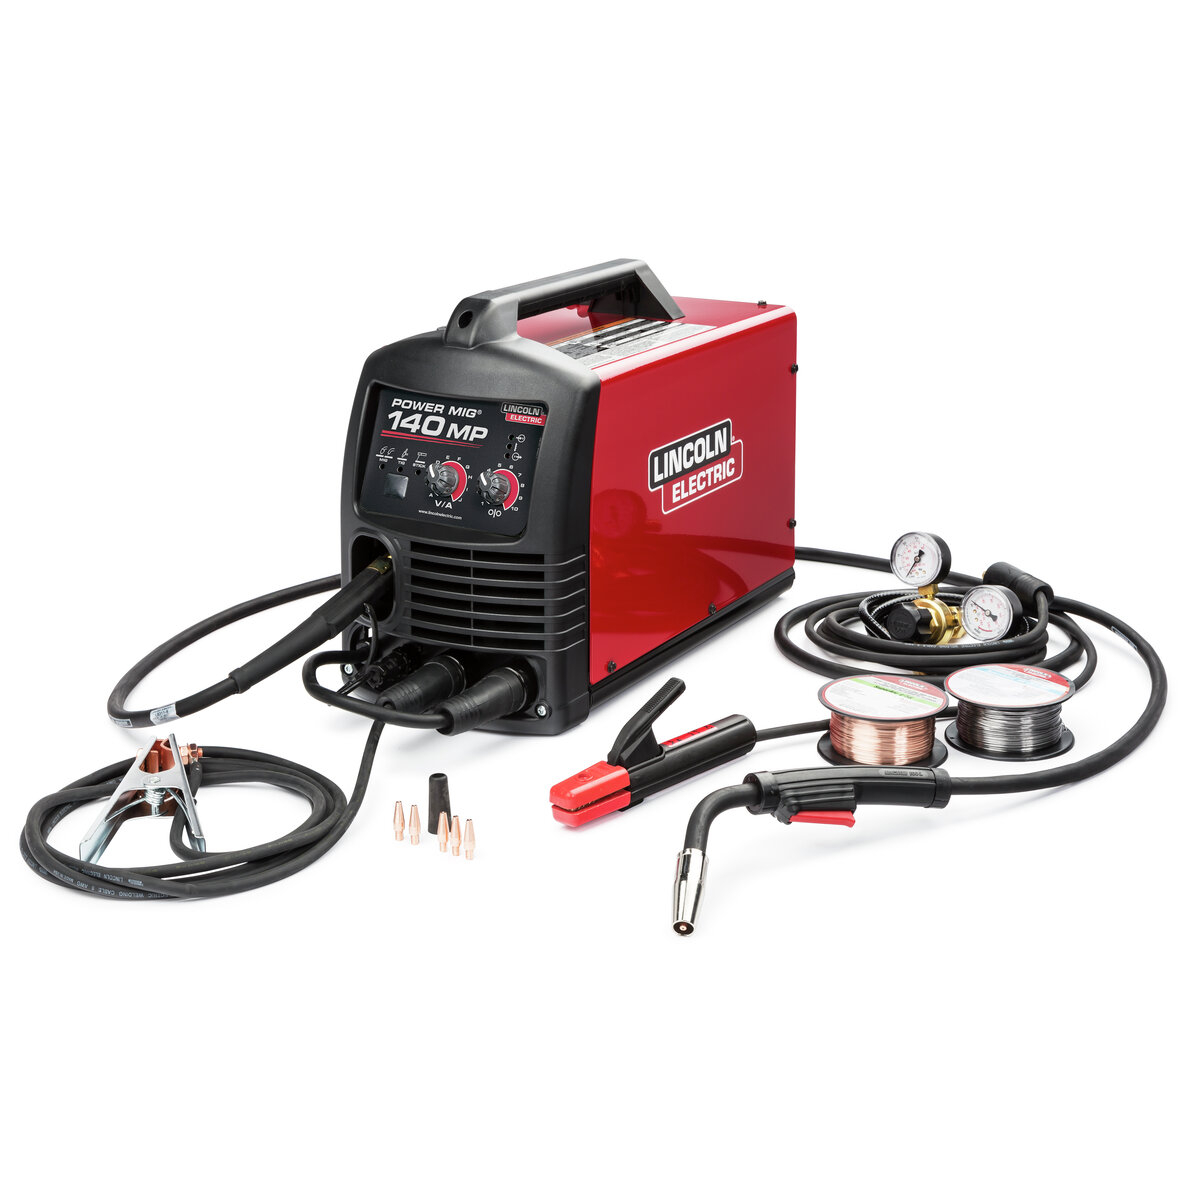 POWER MIG® 140 MP® welder is designed for home projects and repair, sheet metal autobody work, farm and small shop welding.